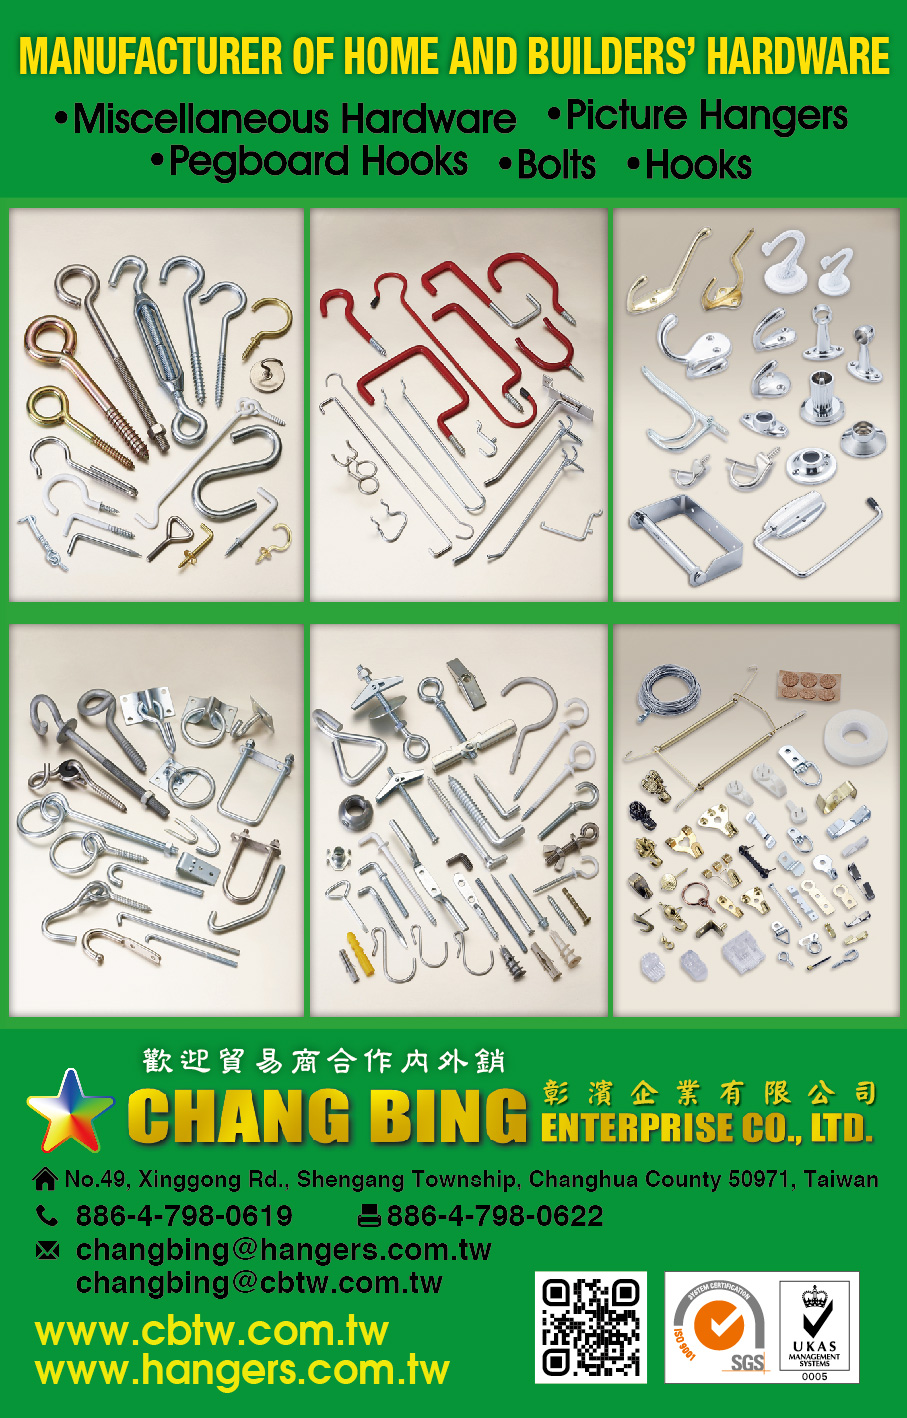 CHANG BING ENTERPRISE CO., LTD. , Home and Builders' Hardware, Miscellaneous Hardware, Picture, Pegboard, Bolts, Hooks